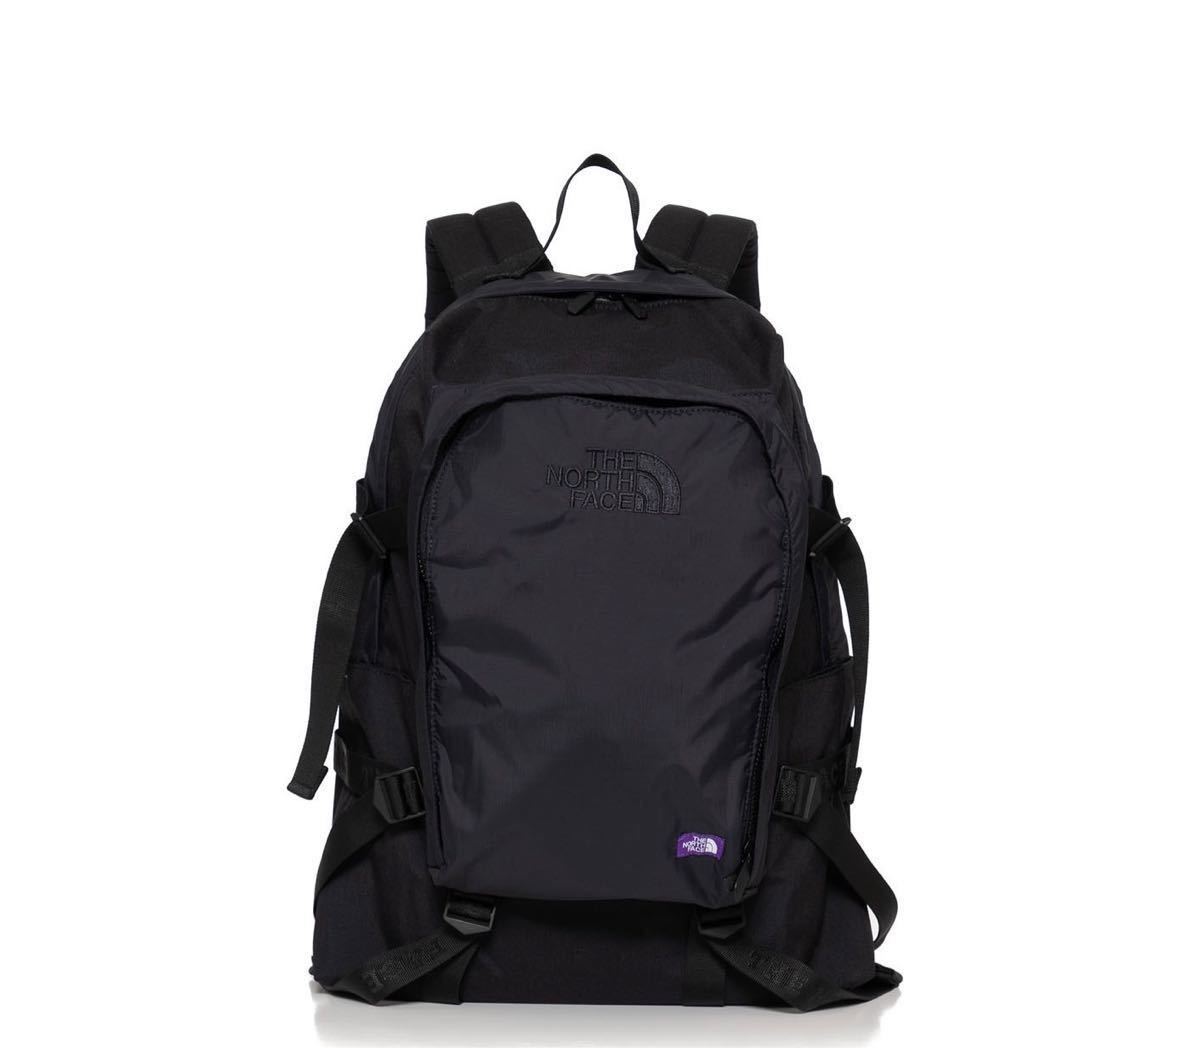 THE NORTH FACE PURPLE LABELバックパック